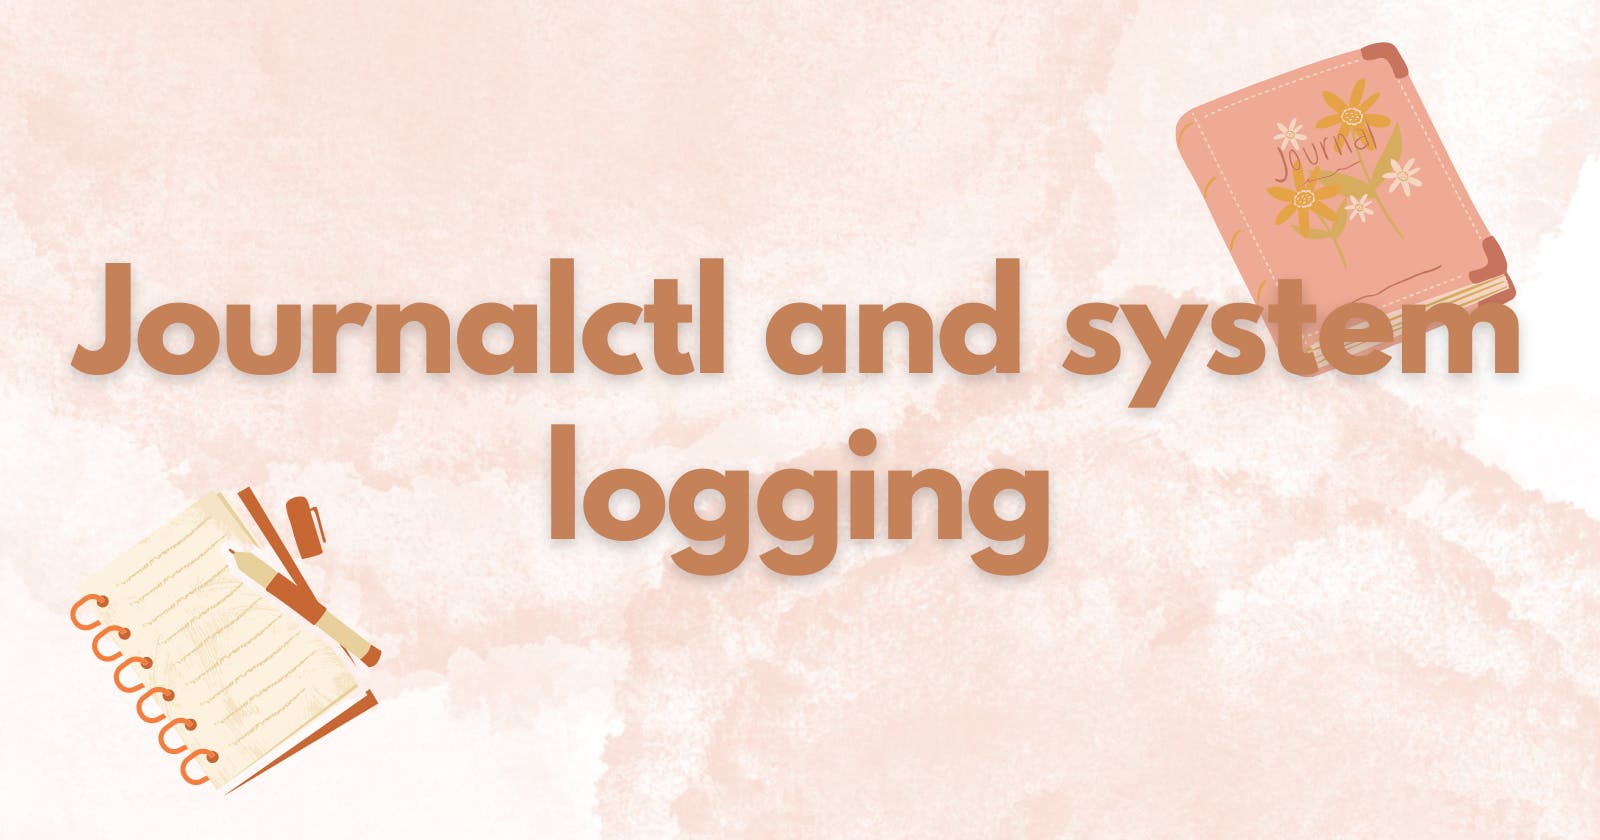 Journalctl and system logging